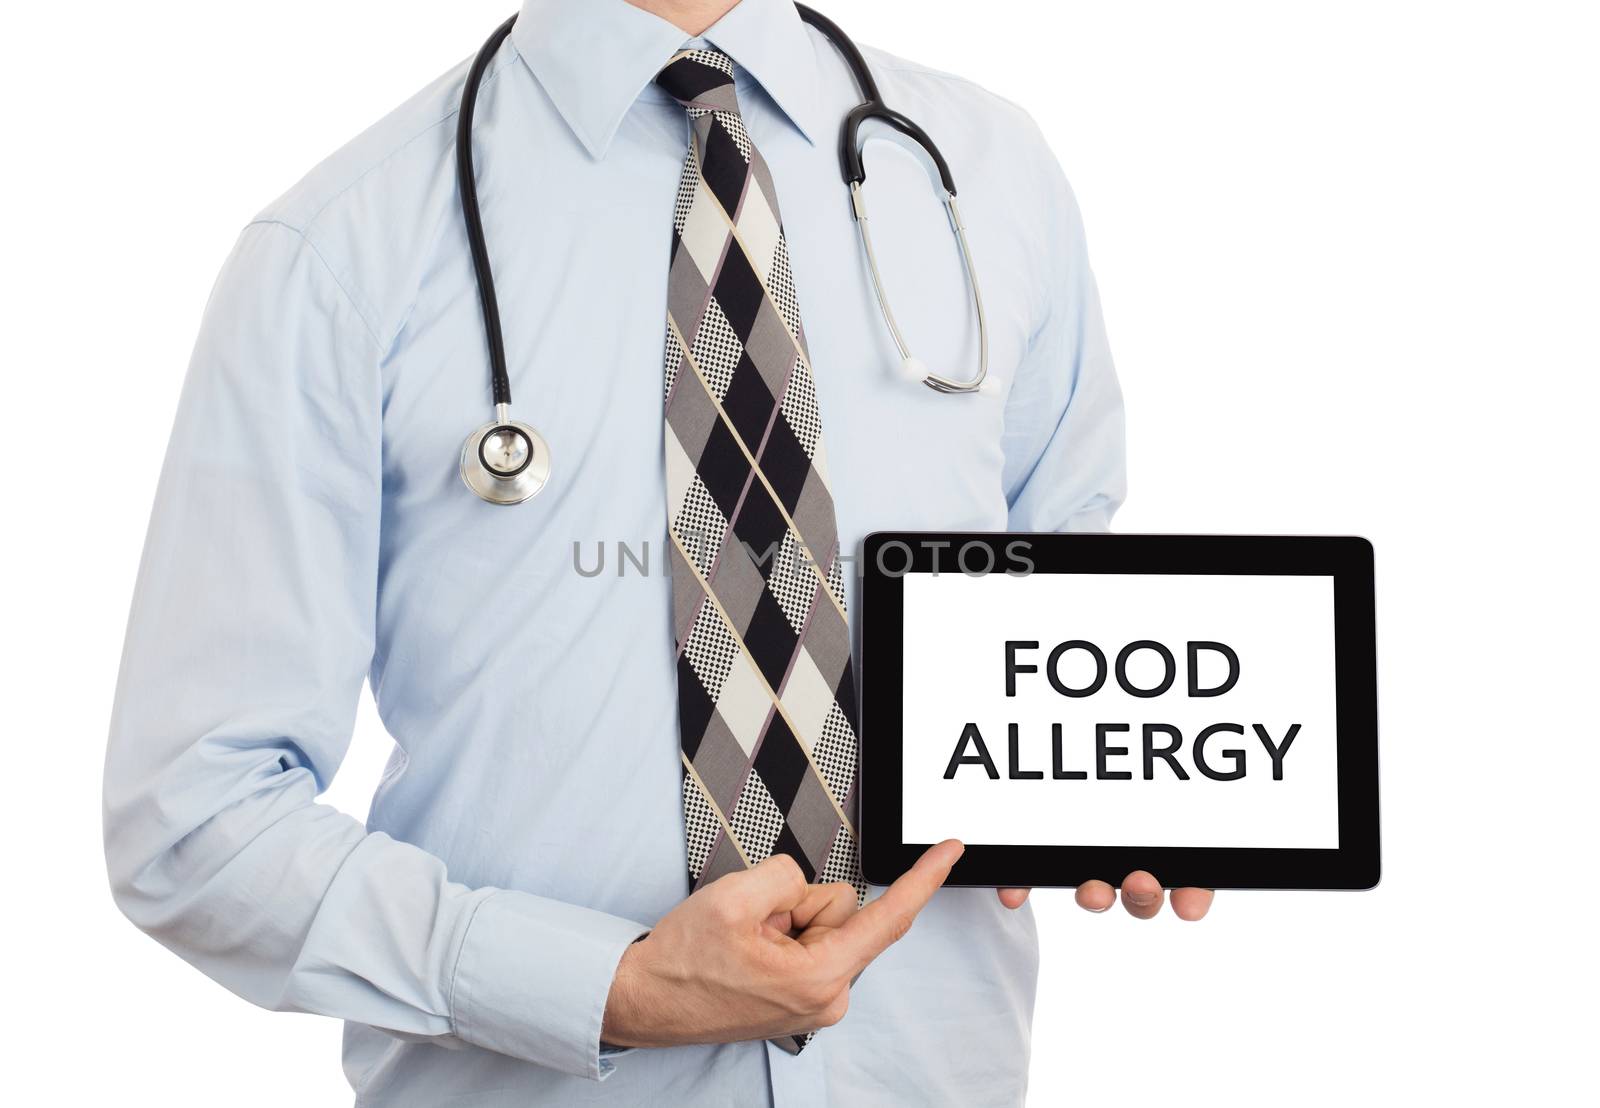 Doctor holding tablet - Food allergy by michaklootwijk